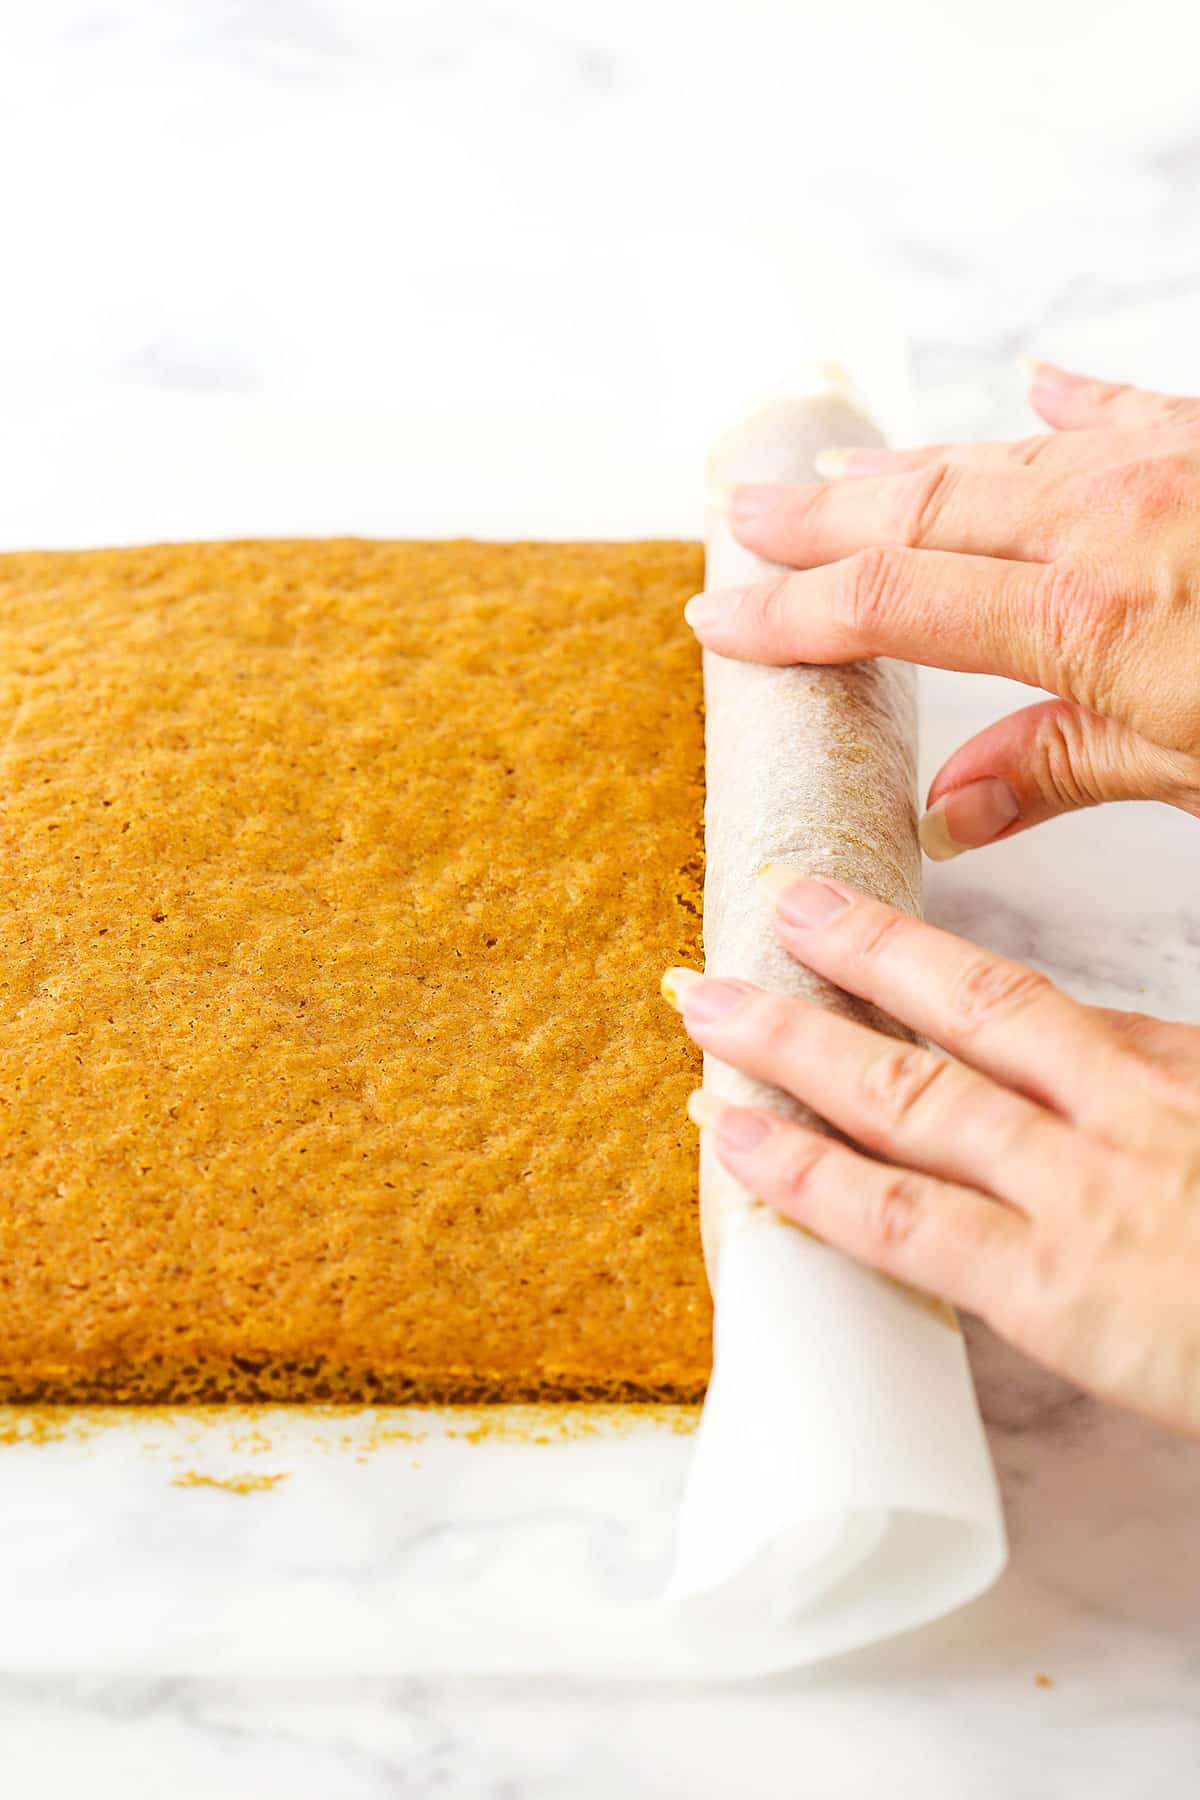 A step in making Pumpkin Roll Cake showing rolling the cake on the parchment paper and forming the shape of the cake